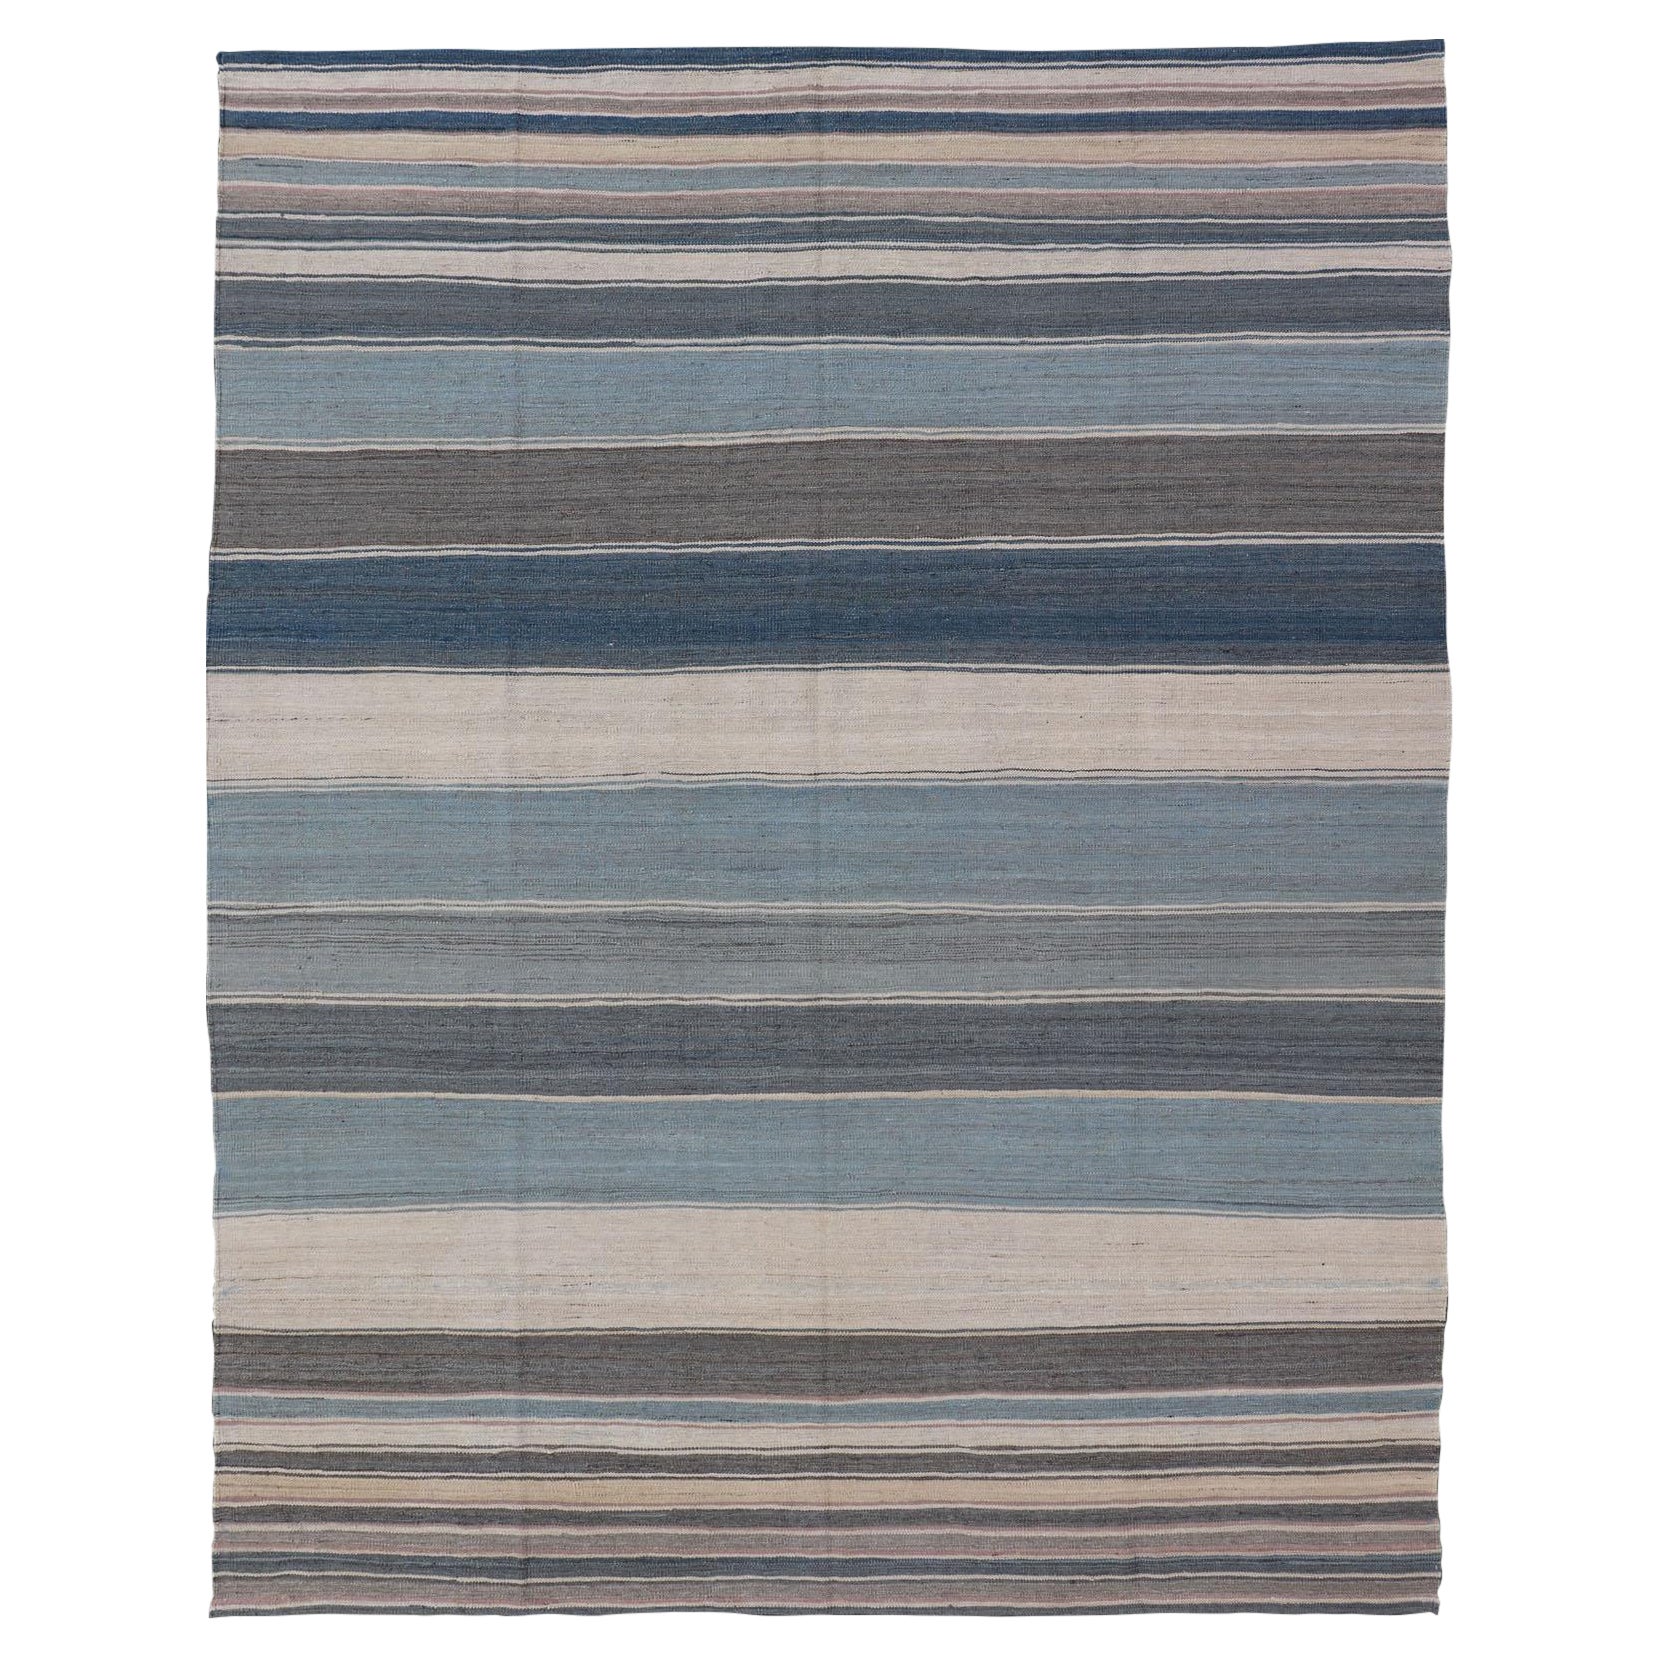 Modern Kilim Rug in Shades of steel Blue, Teal, Brown, Light Gray and Cream For Sale